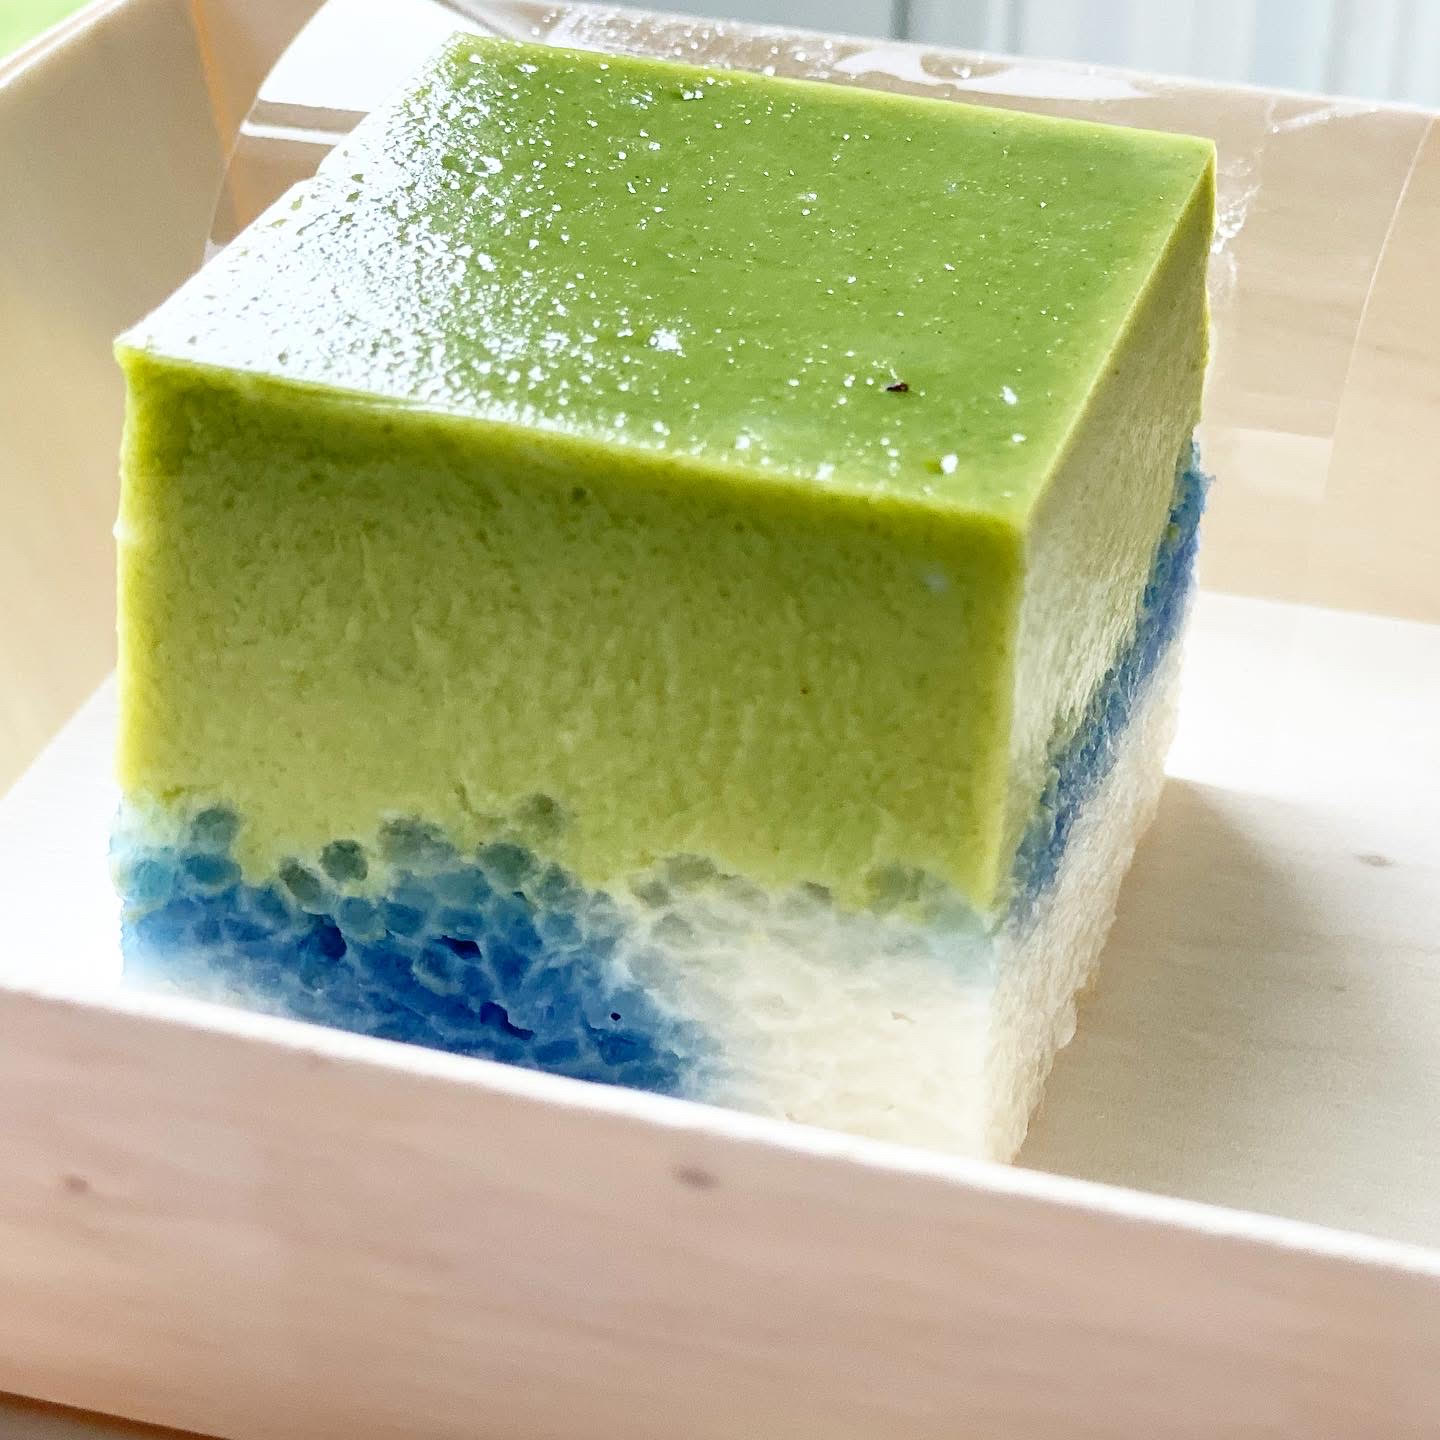 A square kuih dessert has a three layers of green, blue, and white flavors.